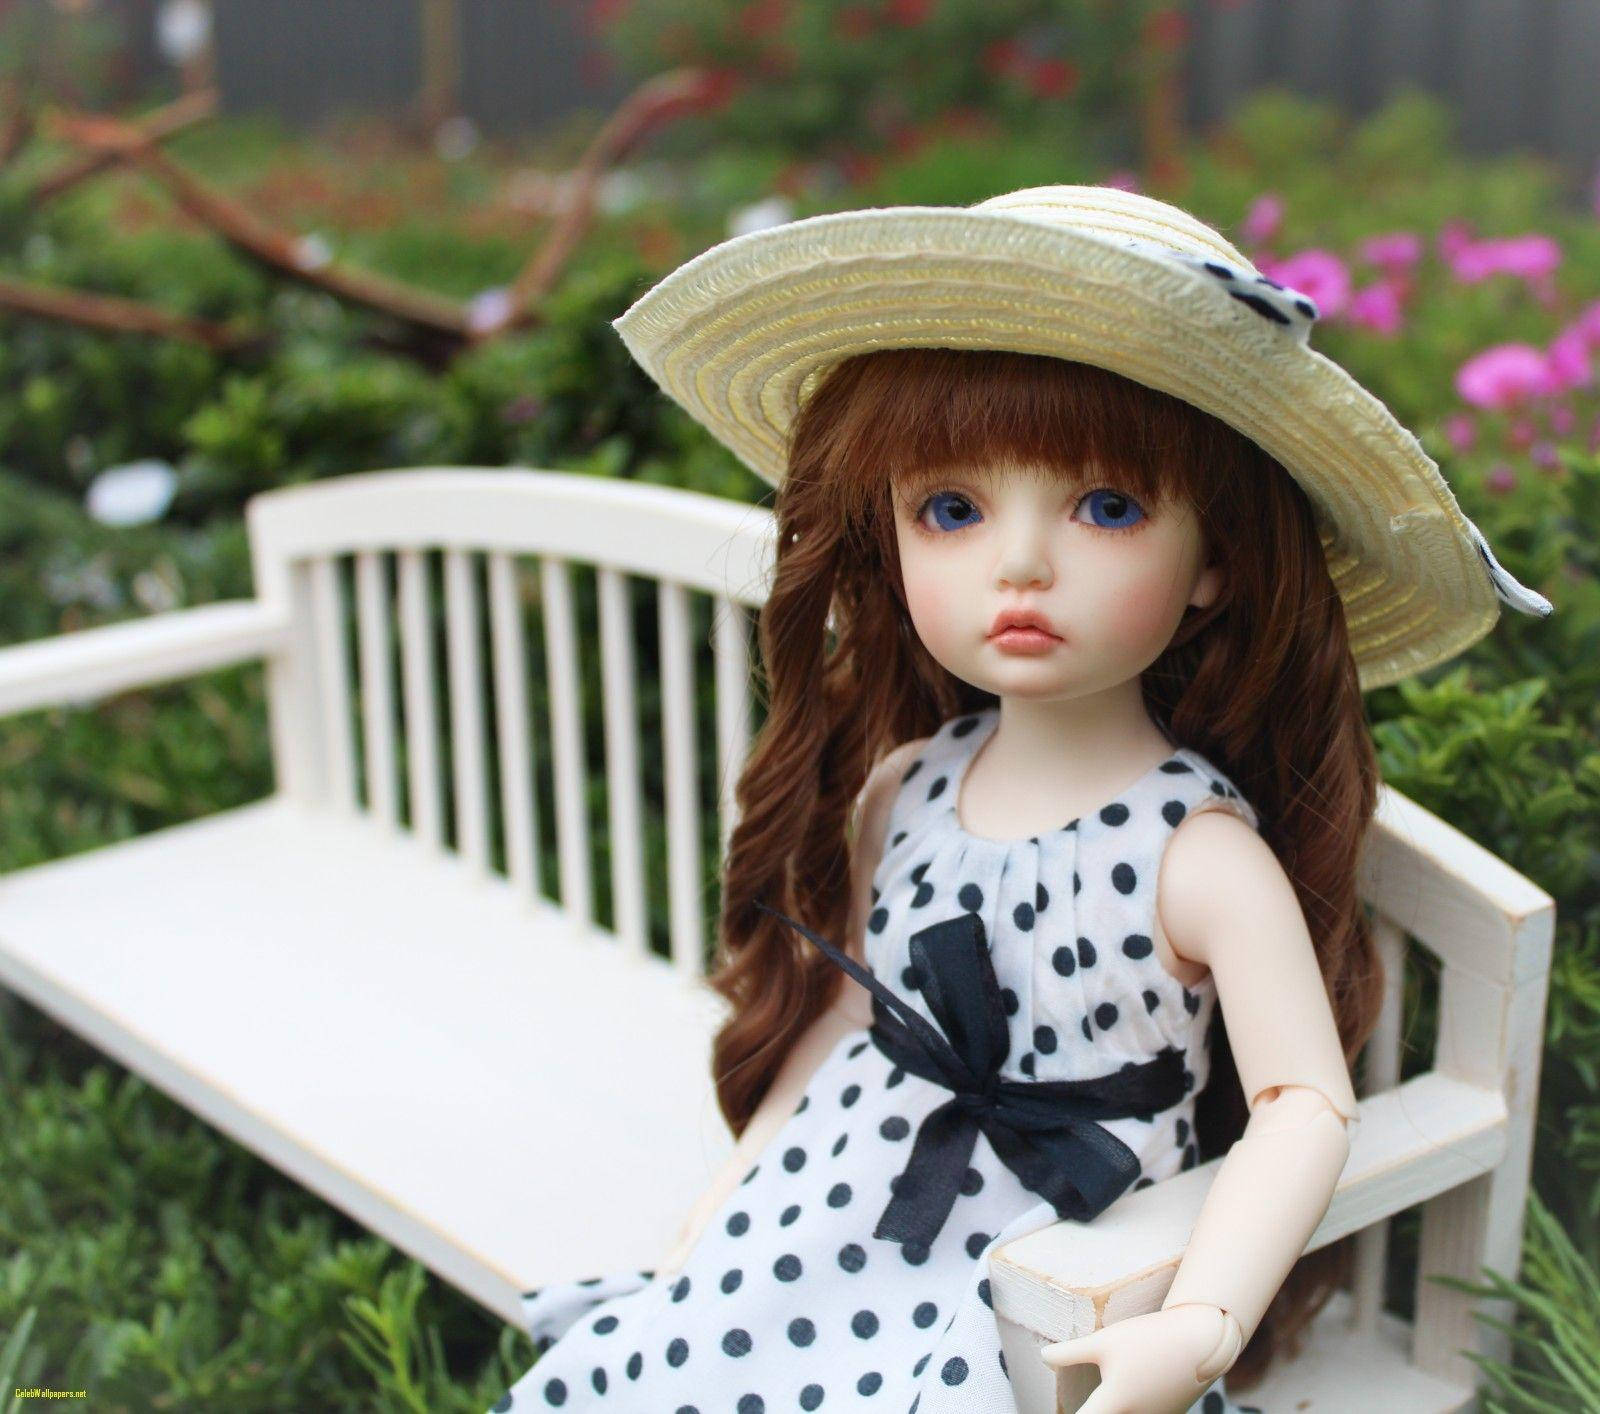 Cute Doll On Bench Wallpaper